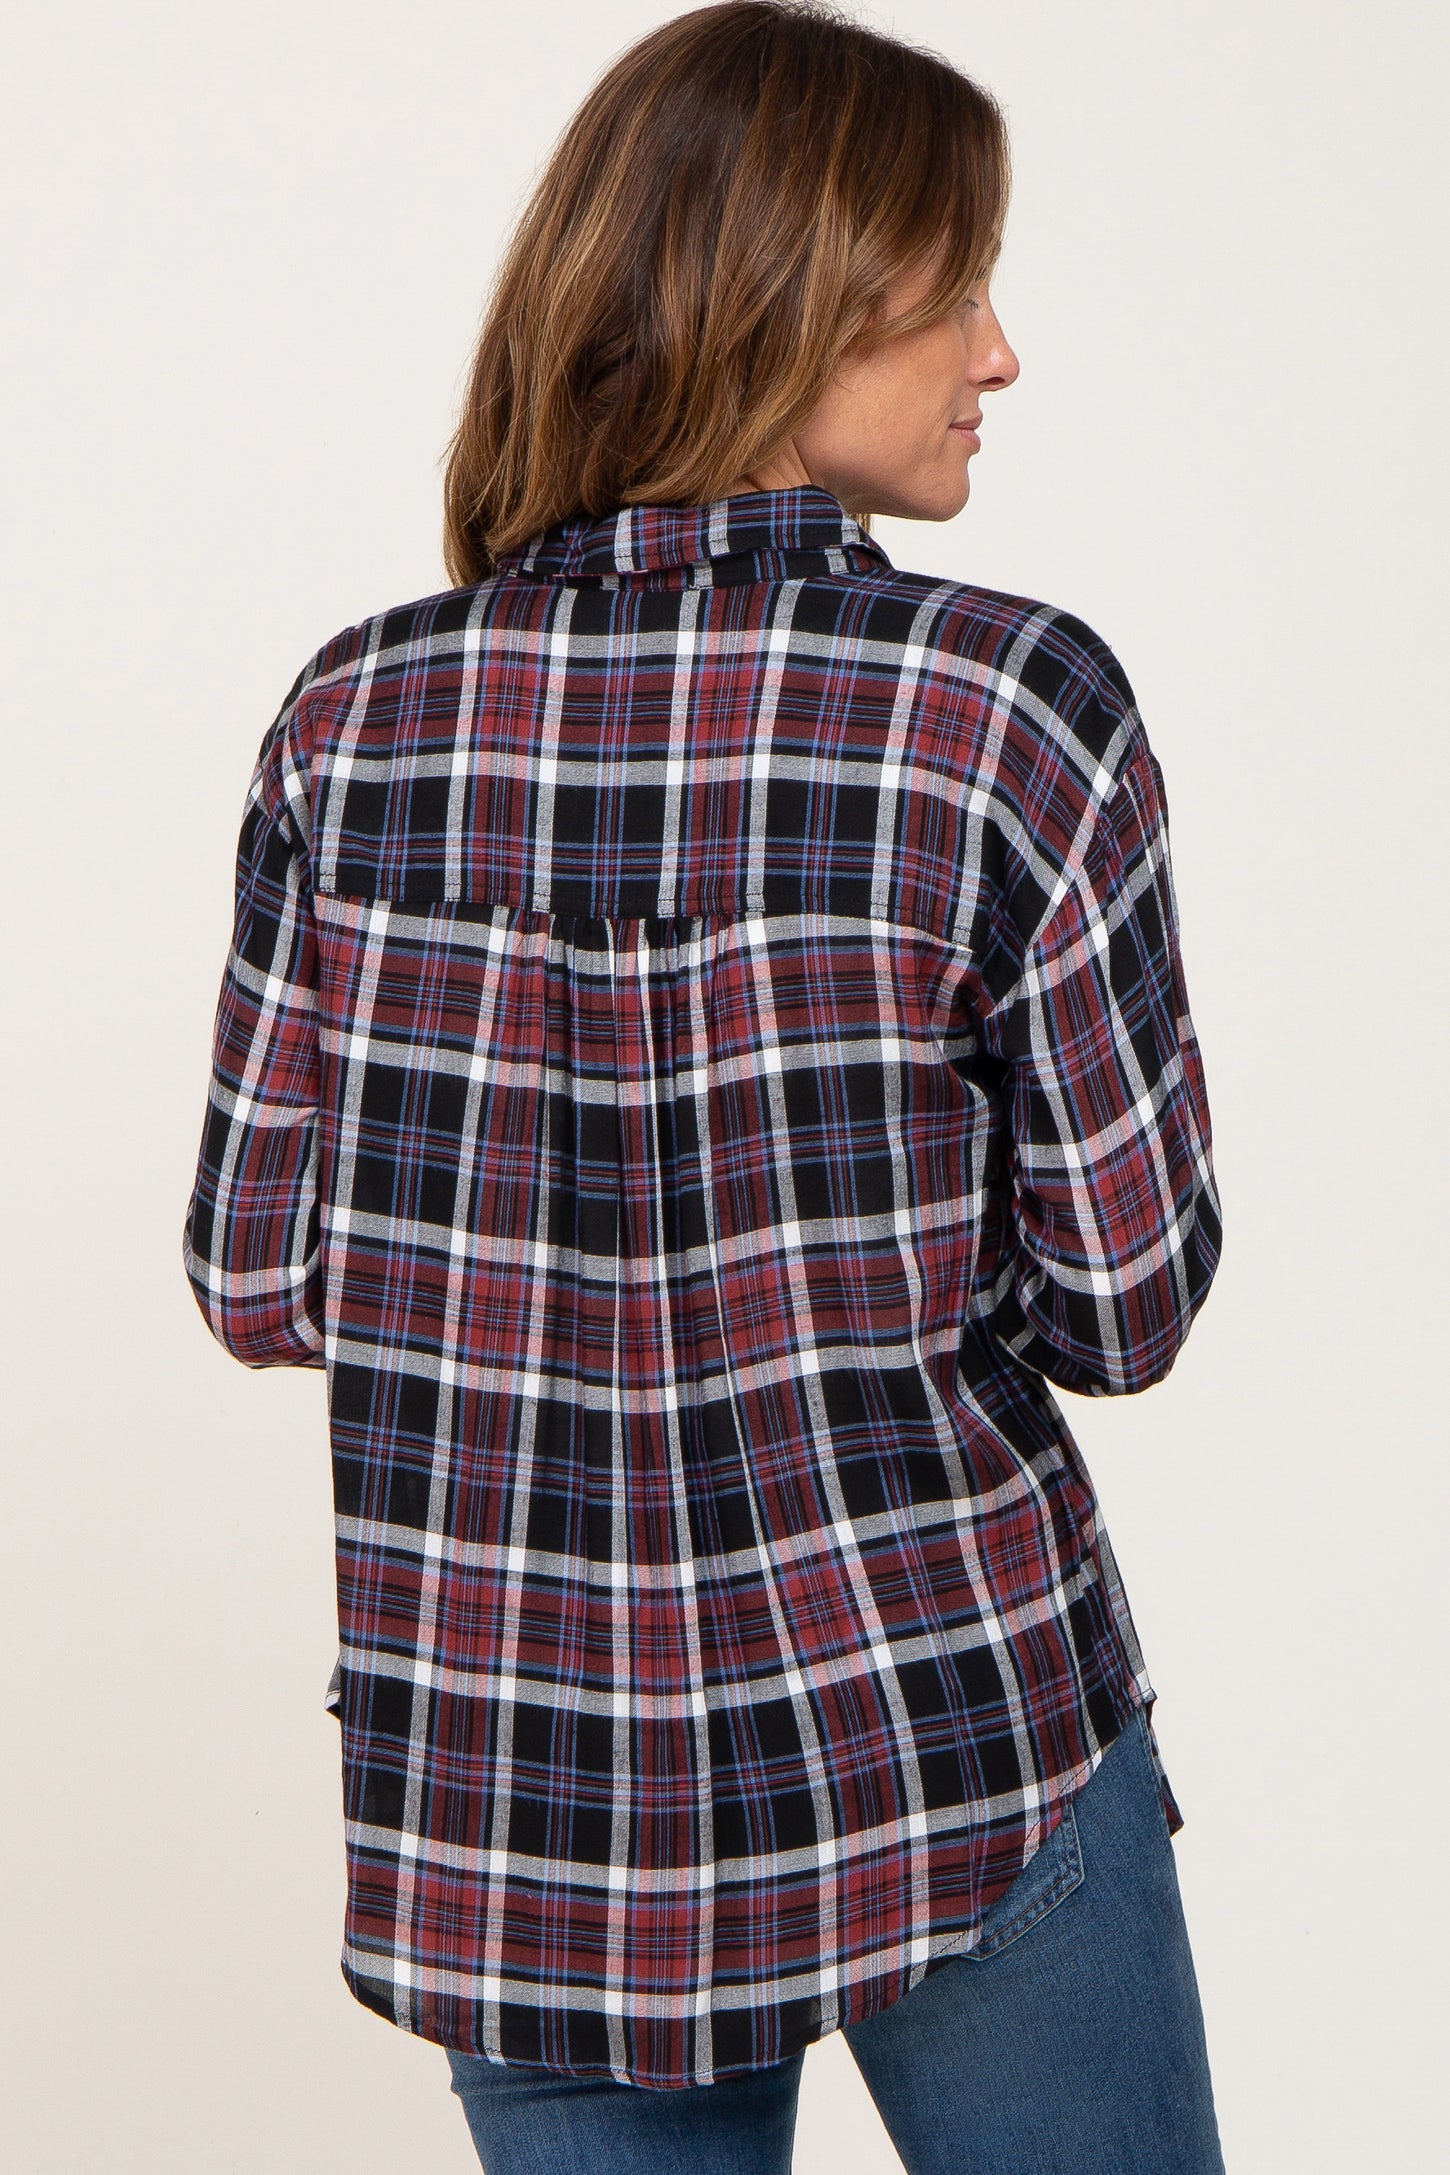 Black Plaid Button Up Long Sleeve Top